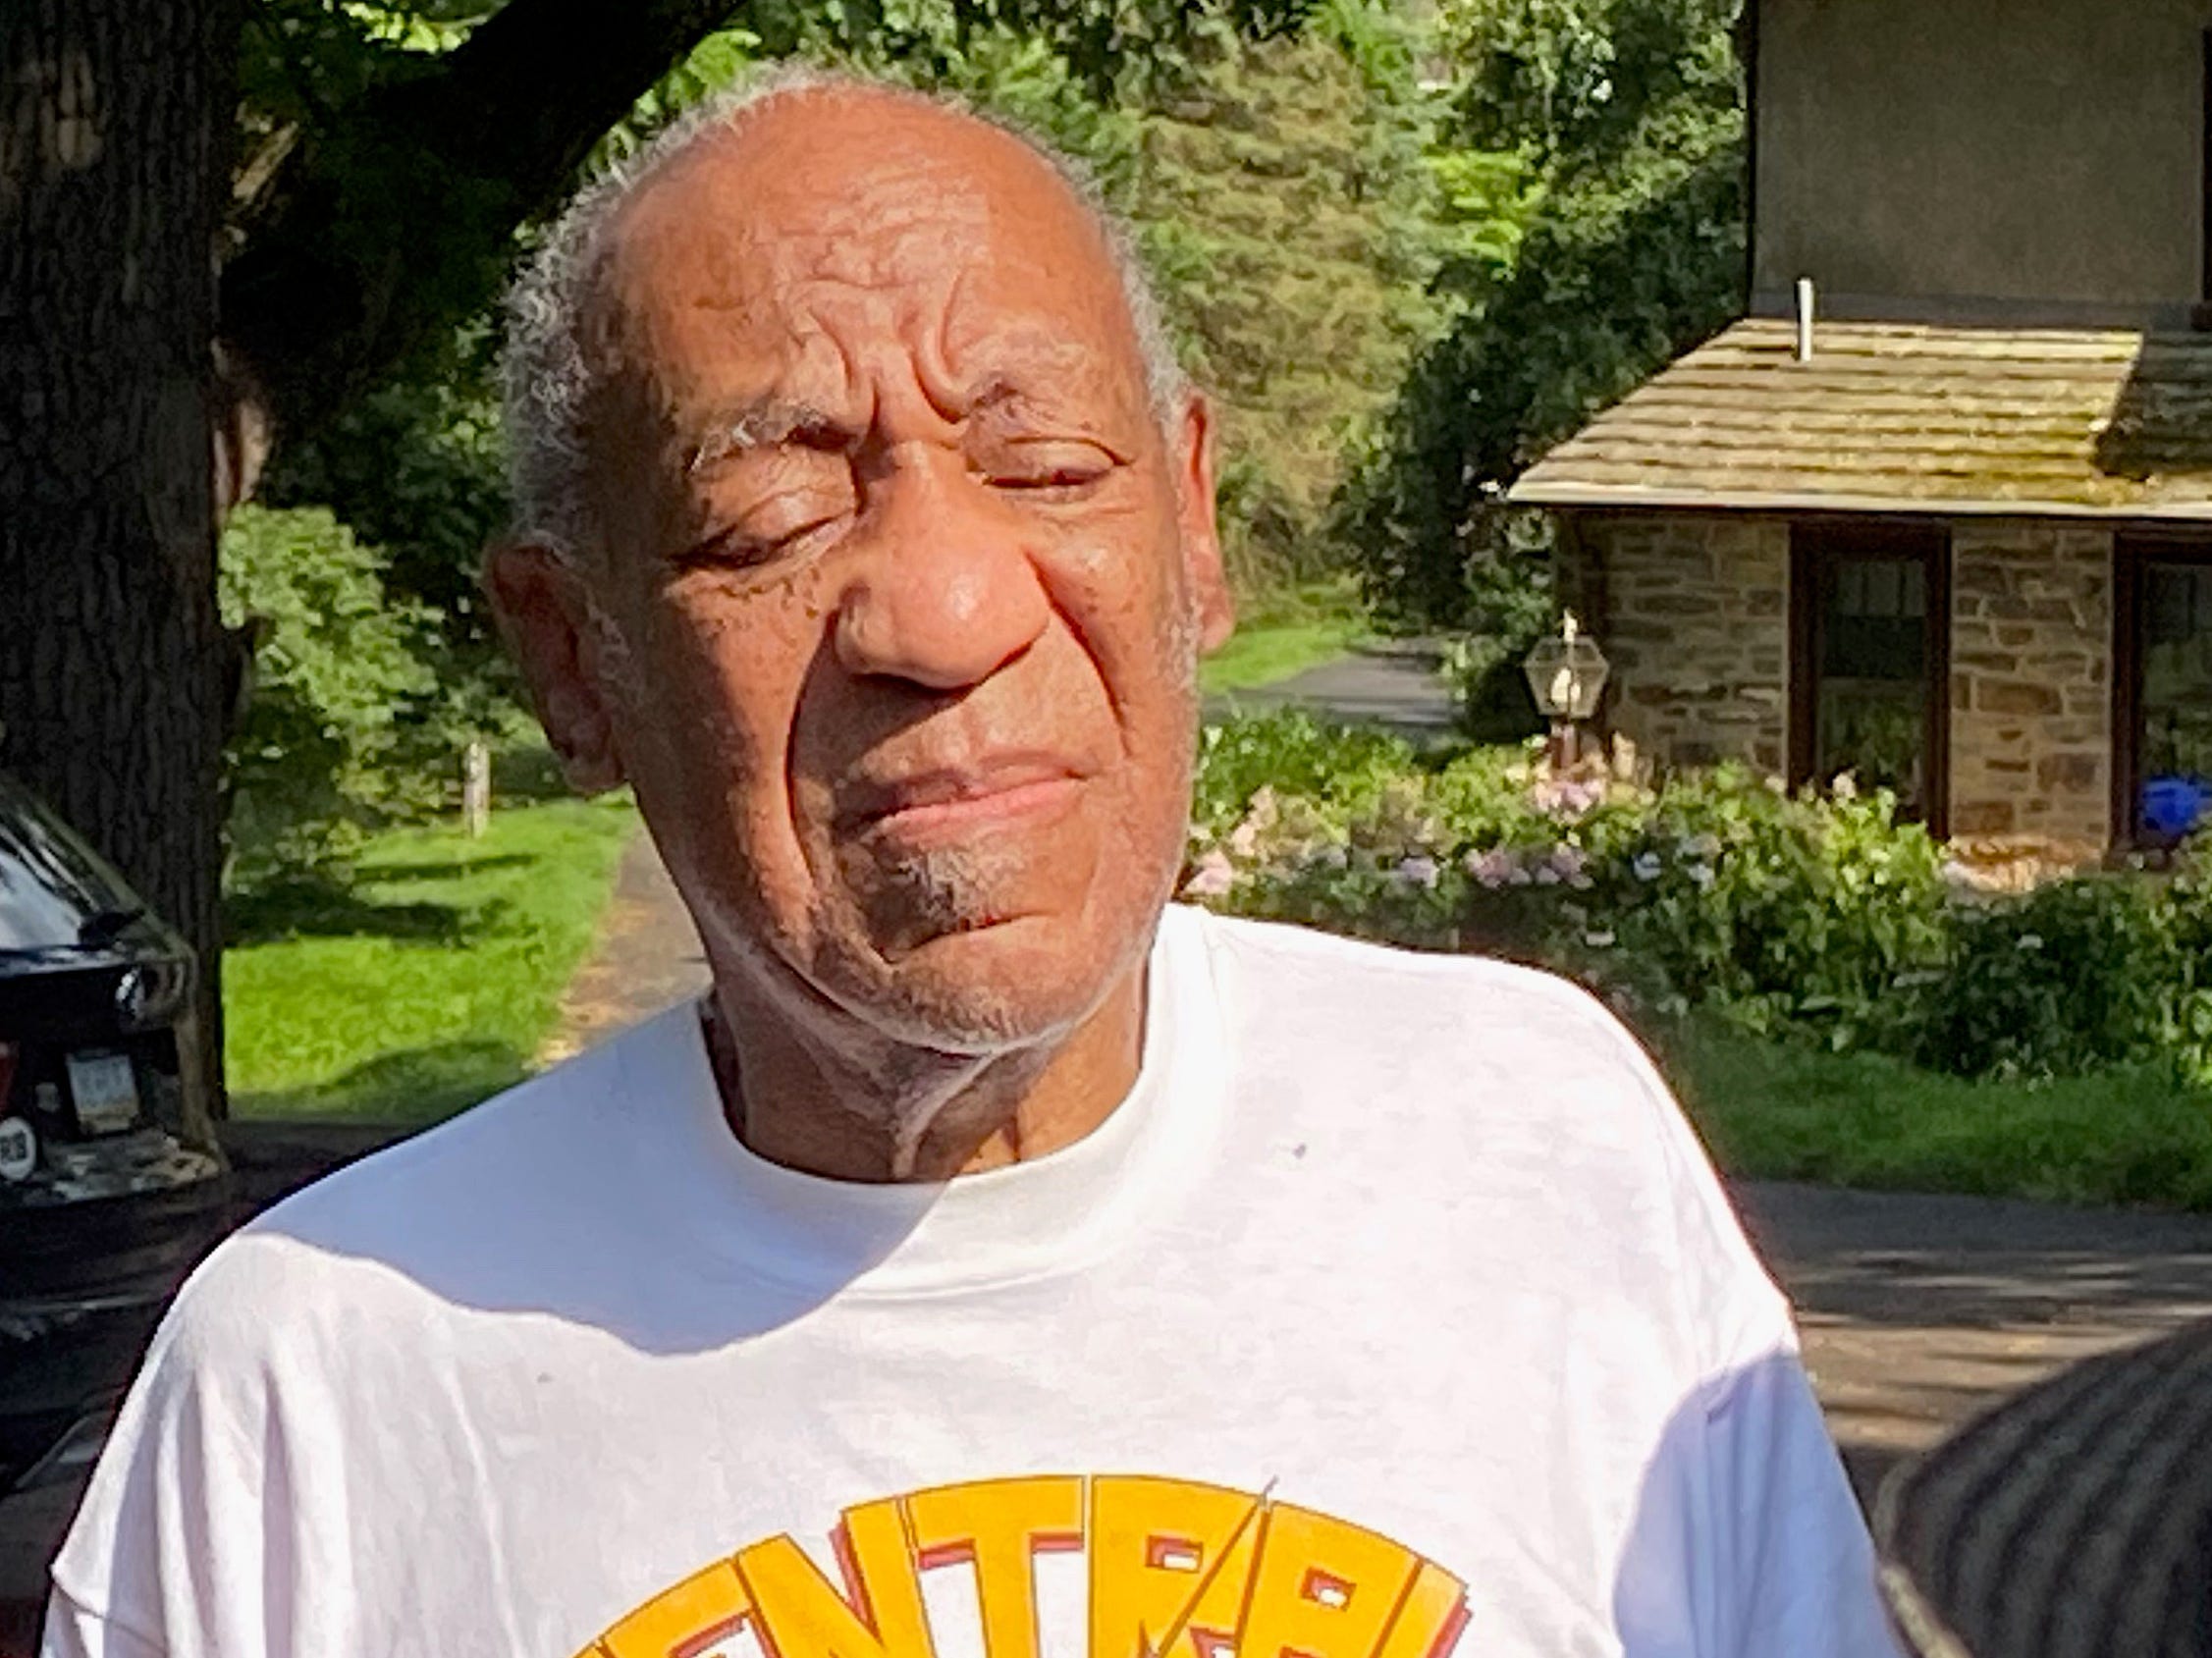 Bill Cosby speaks to reporters after being released from prison